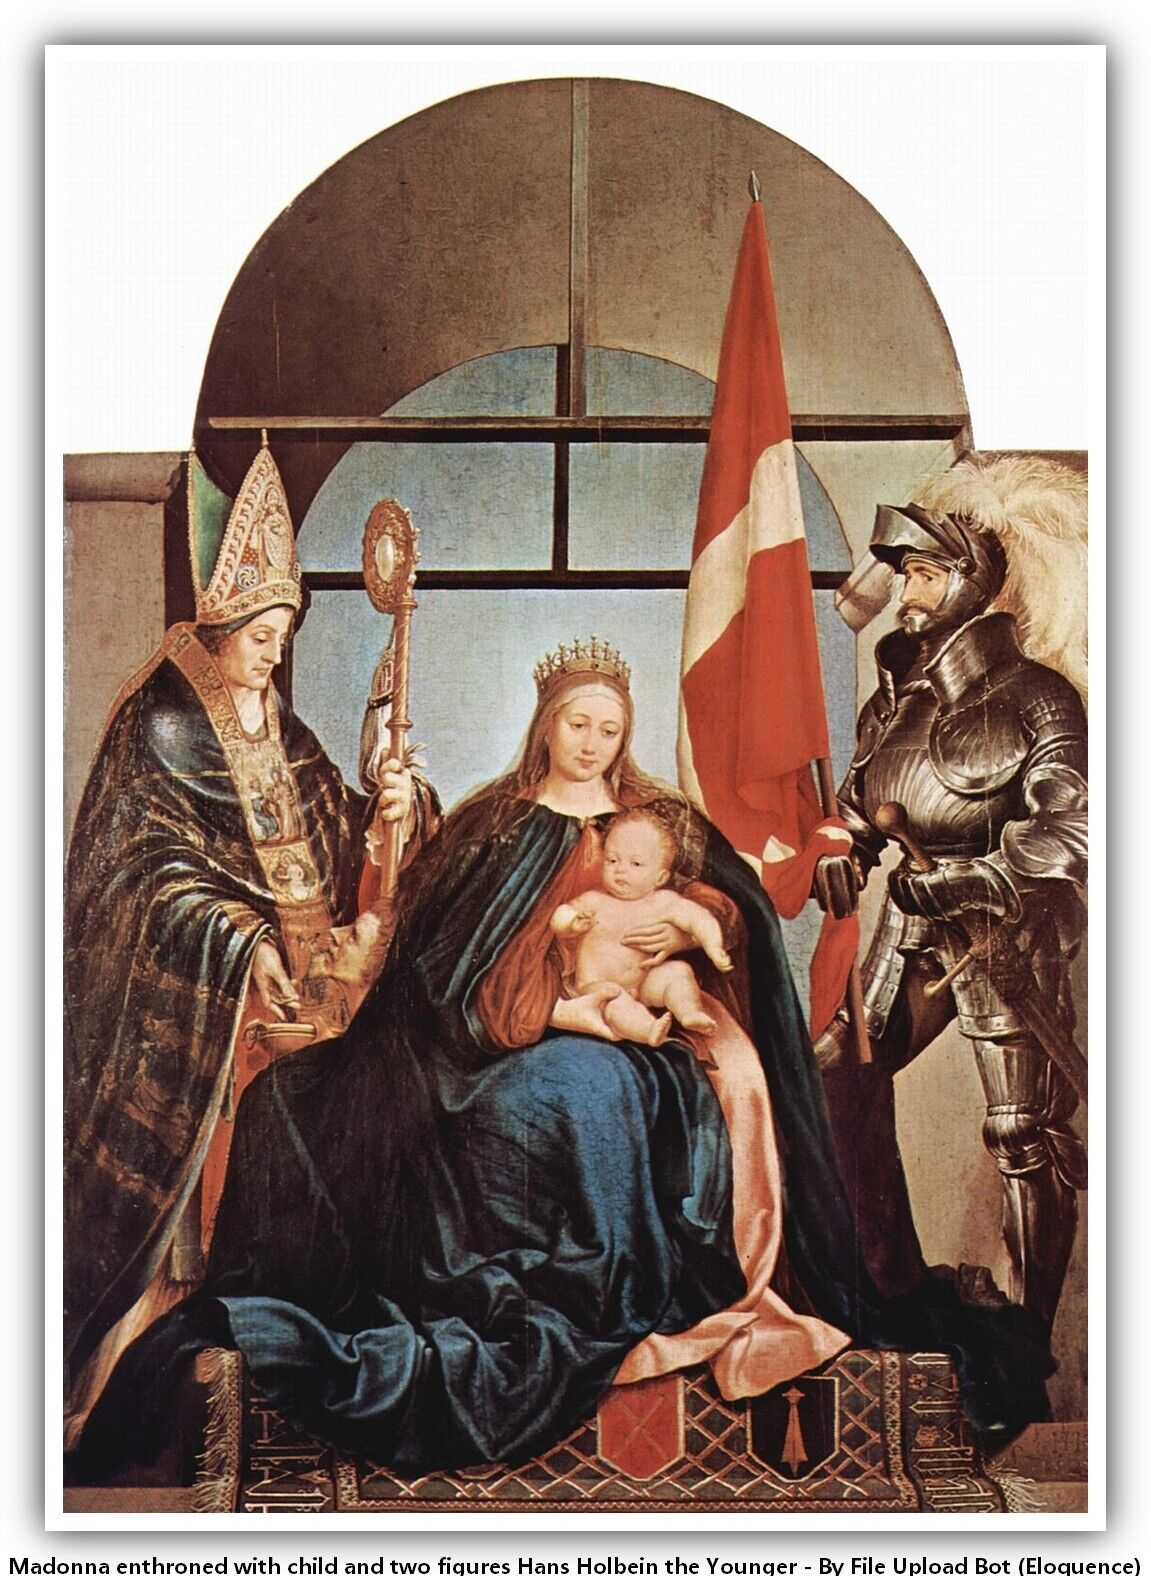 Madonna enthroned with child and two figures Hans Holbein the Younger